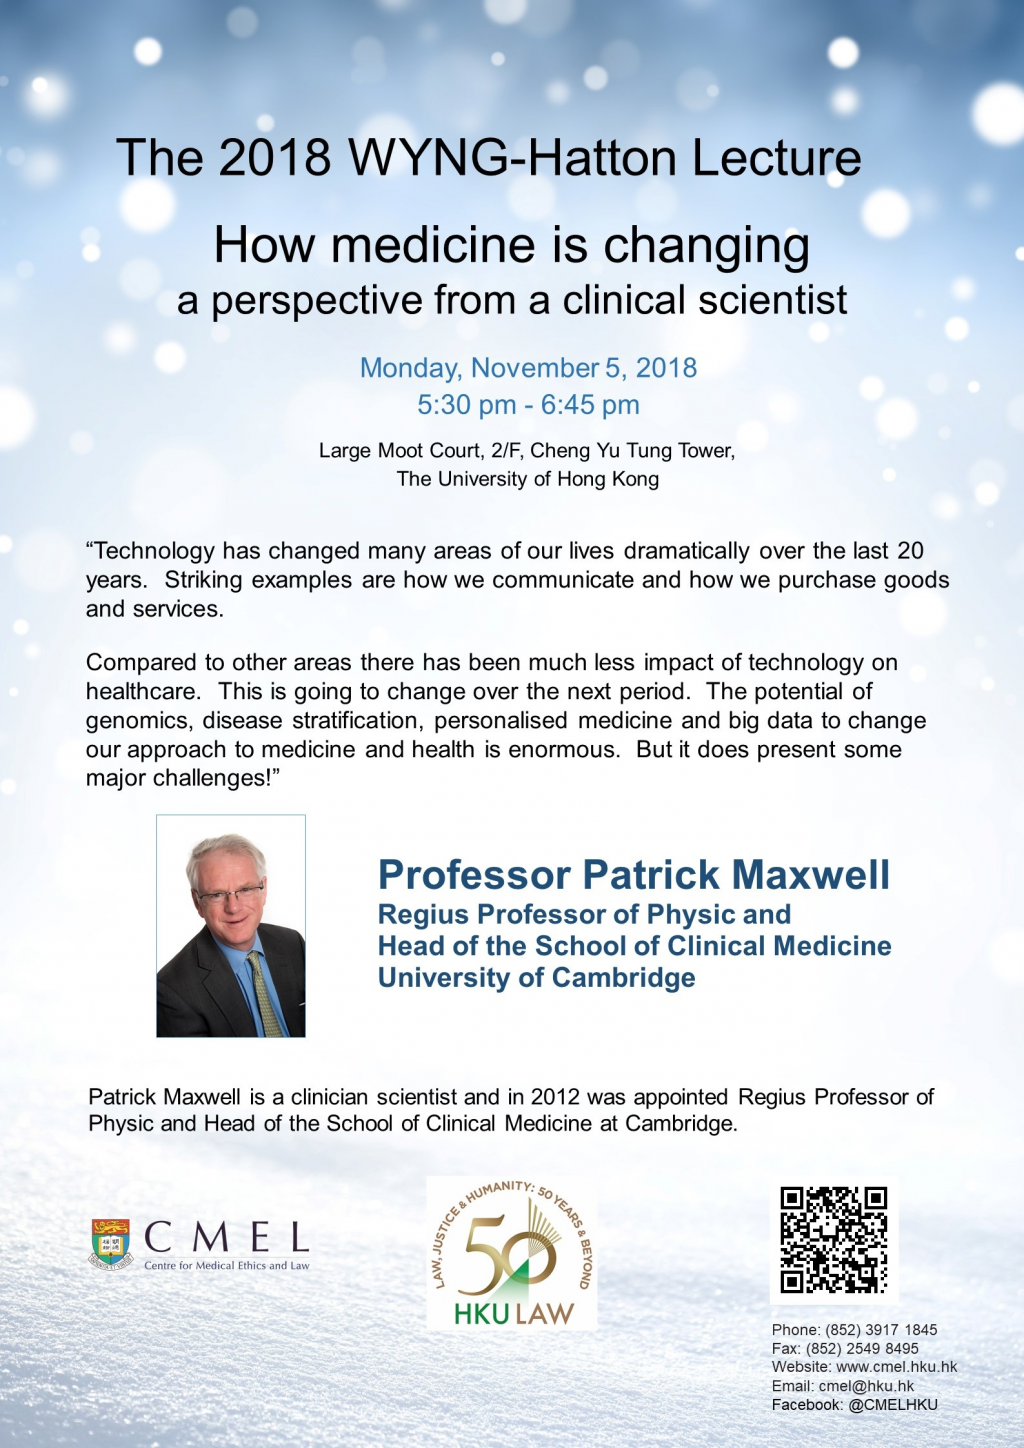 The 2018 WYNG-Hatton Lecture: 'How medicine is changing - a perspective from a clinical scientist'